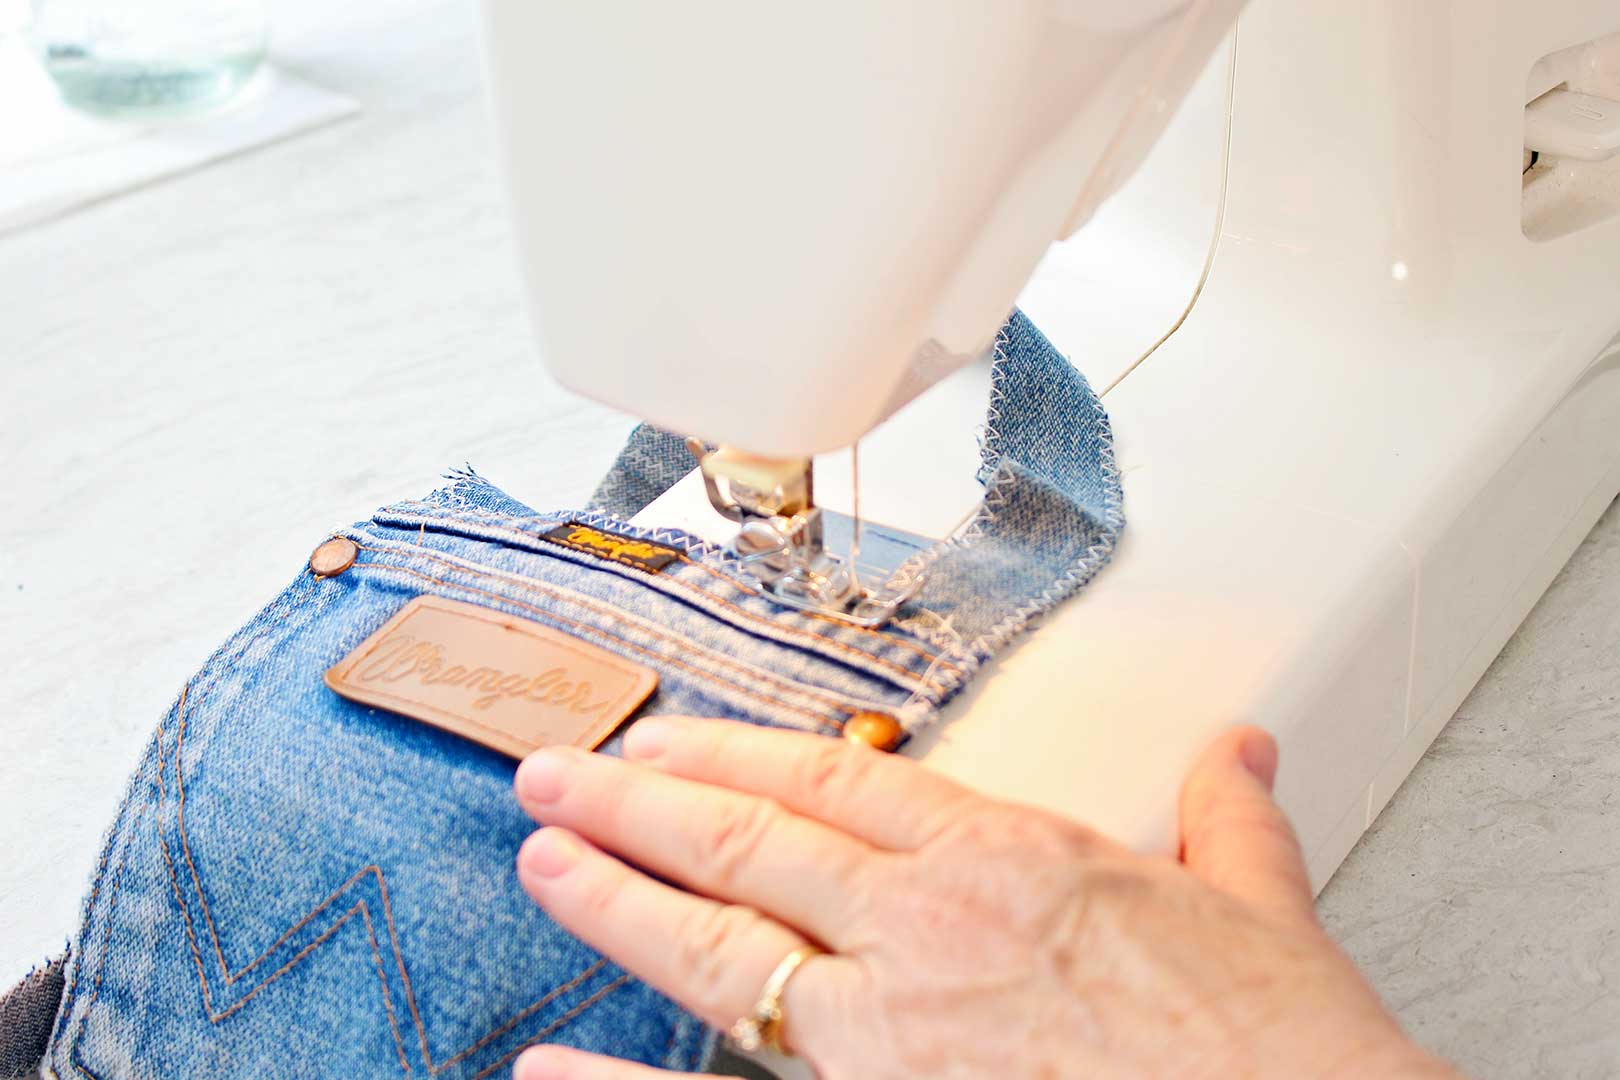 Hand sewing straps on pocket purse using a sewing machine.